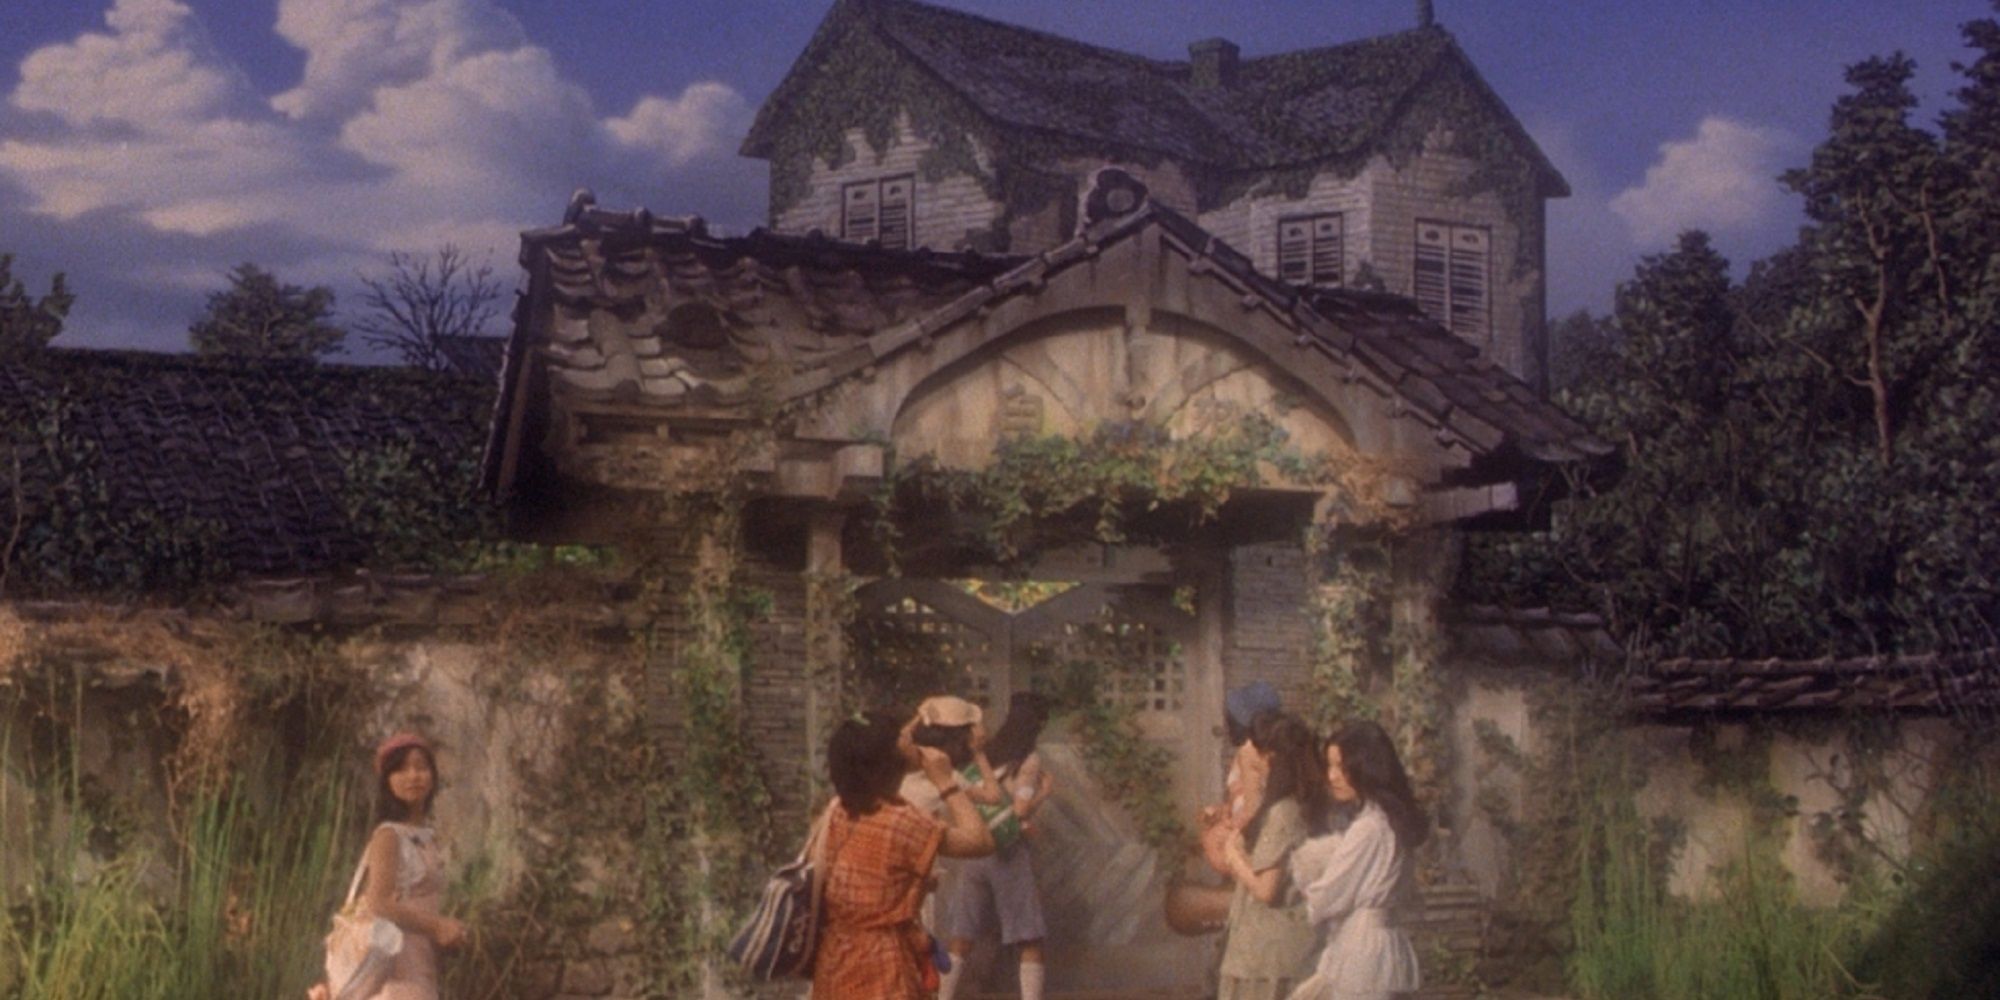 Gorgeous and her group of friends arriving at her aunt's strange house in 'Hausu.'